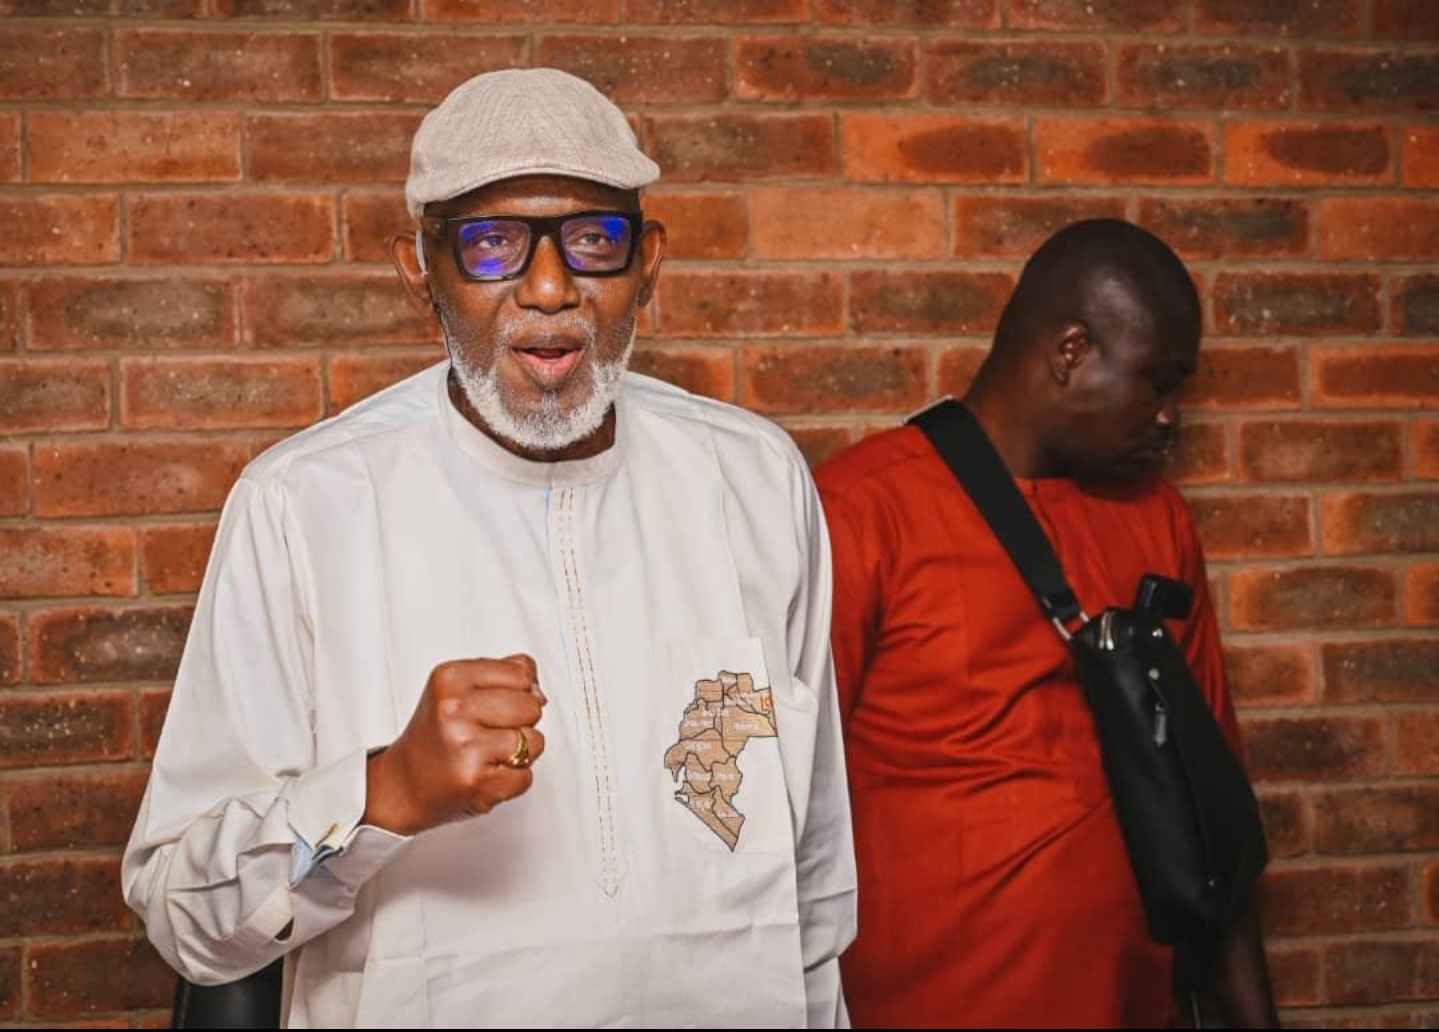 Ondo: PDP Fires Akeredolu For Staying In Oyo After Vacation